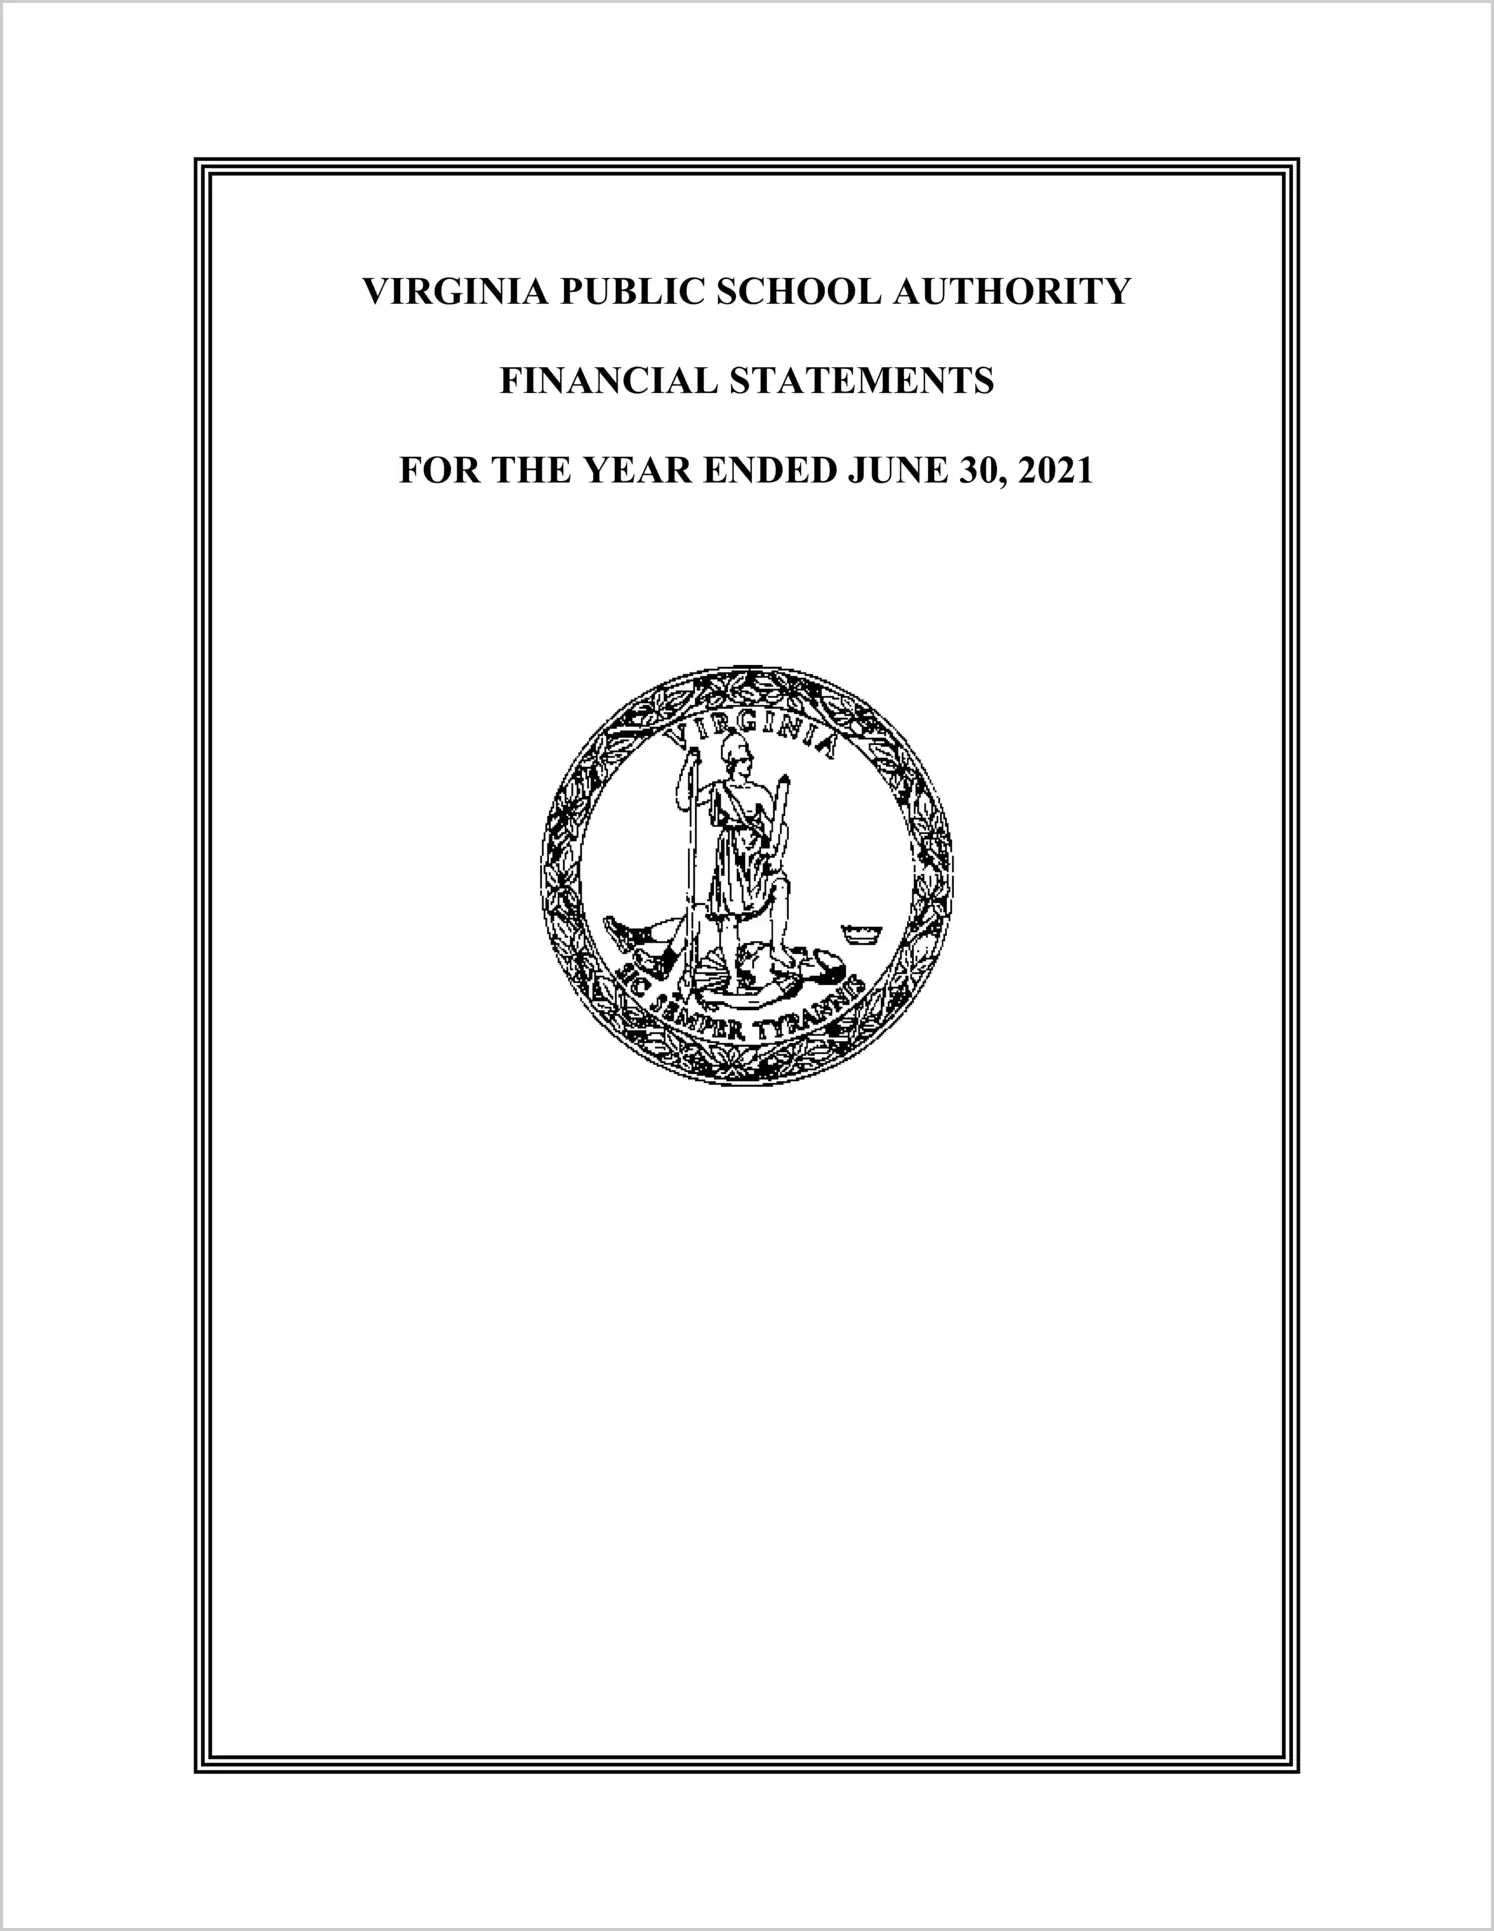 Virginia Public School Authority Financial Statements for the year ended June 30, 2021